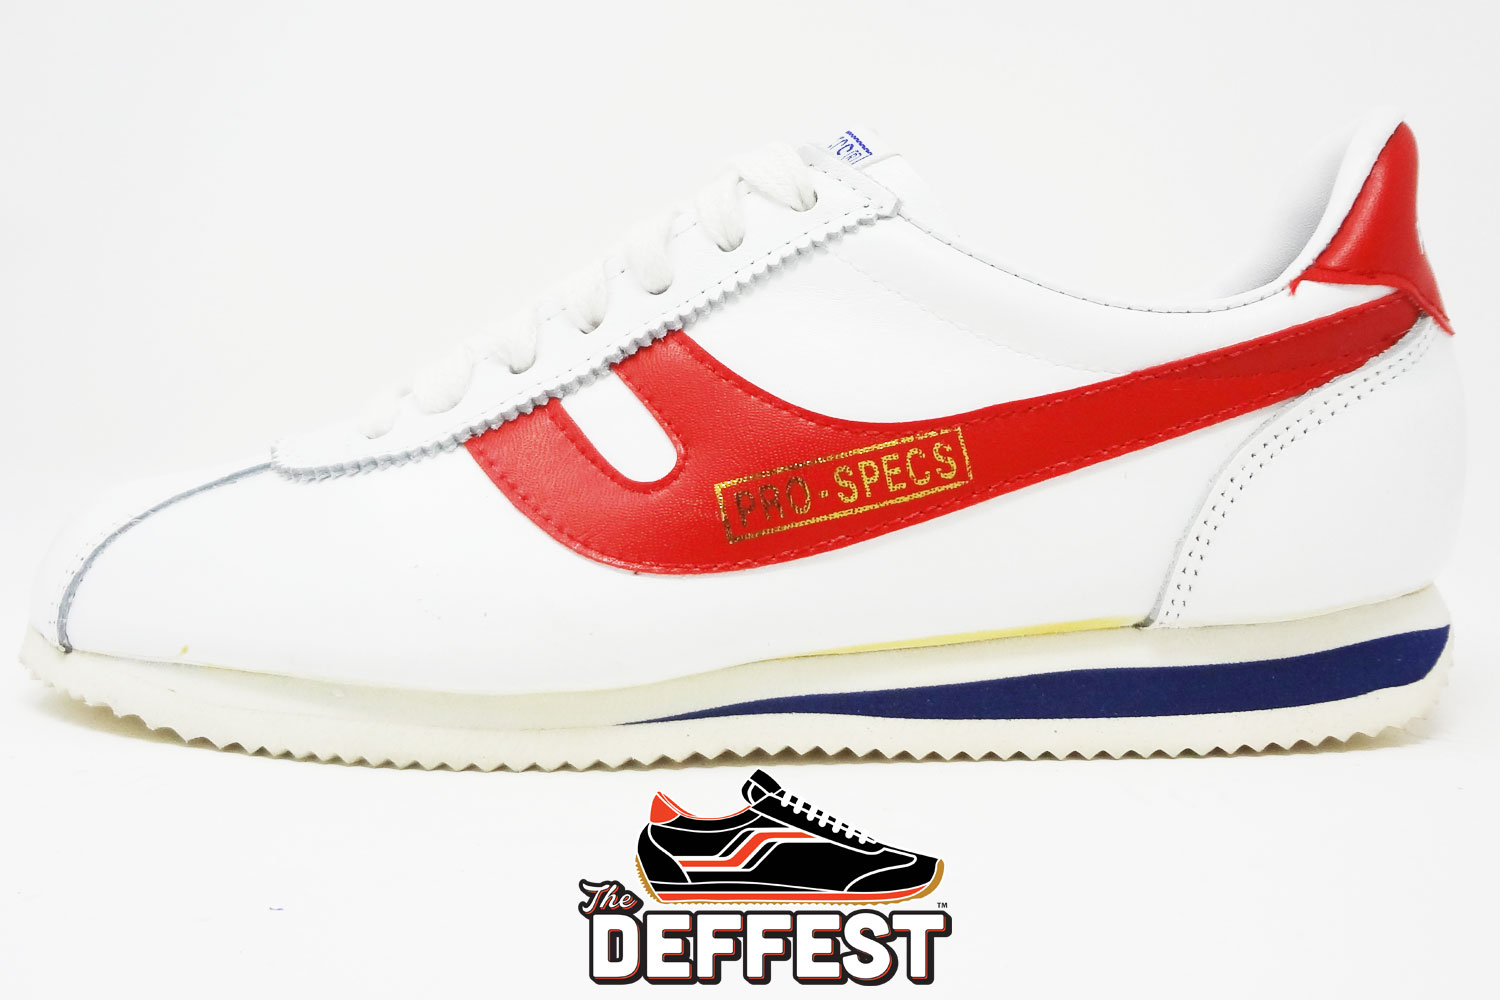 Old school Pro-Specs Sioux Nike Cortez style sneakers profile view @ The Deffest